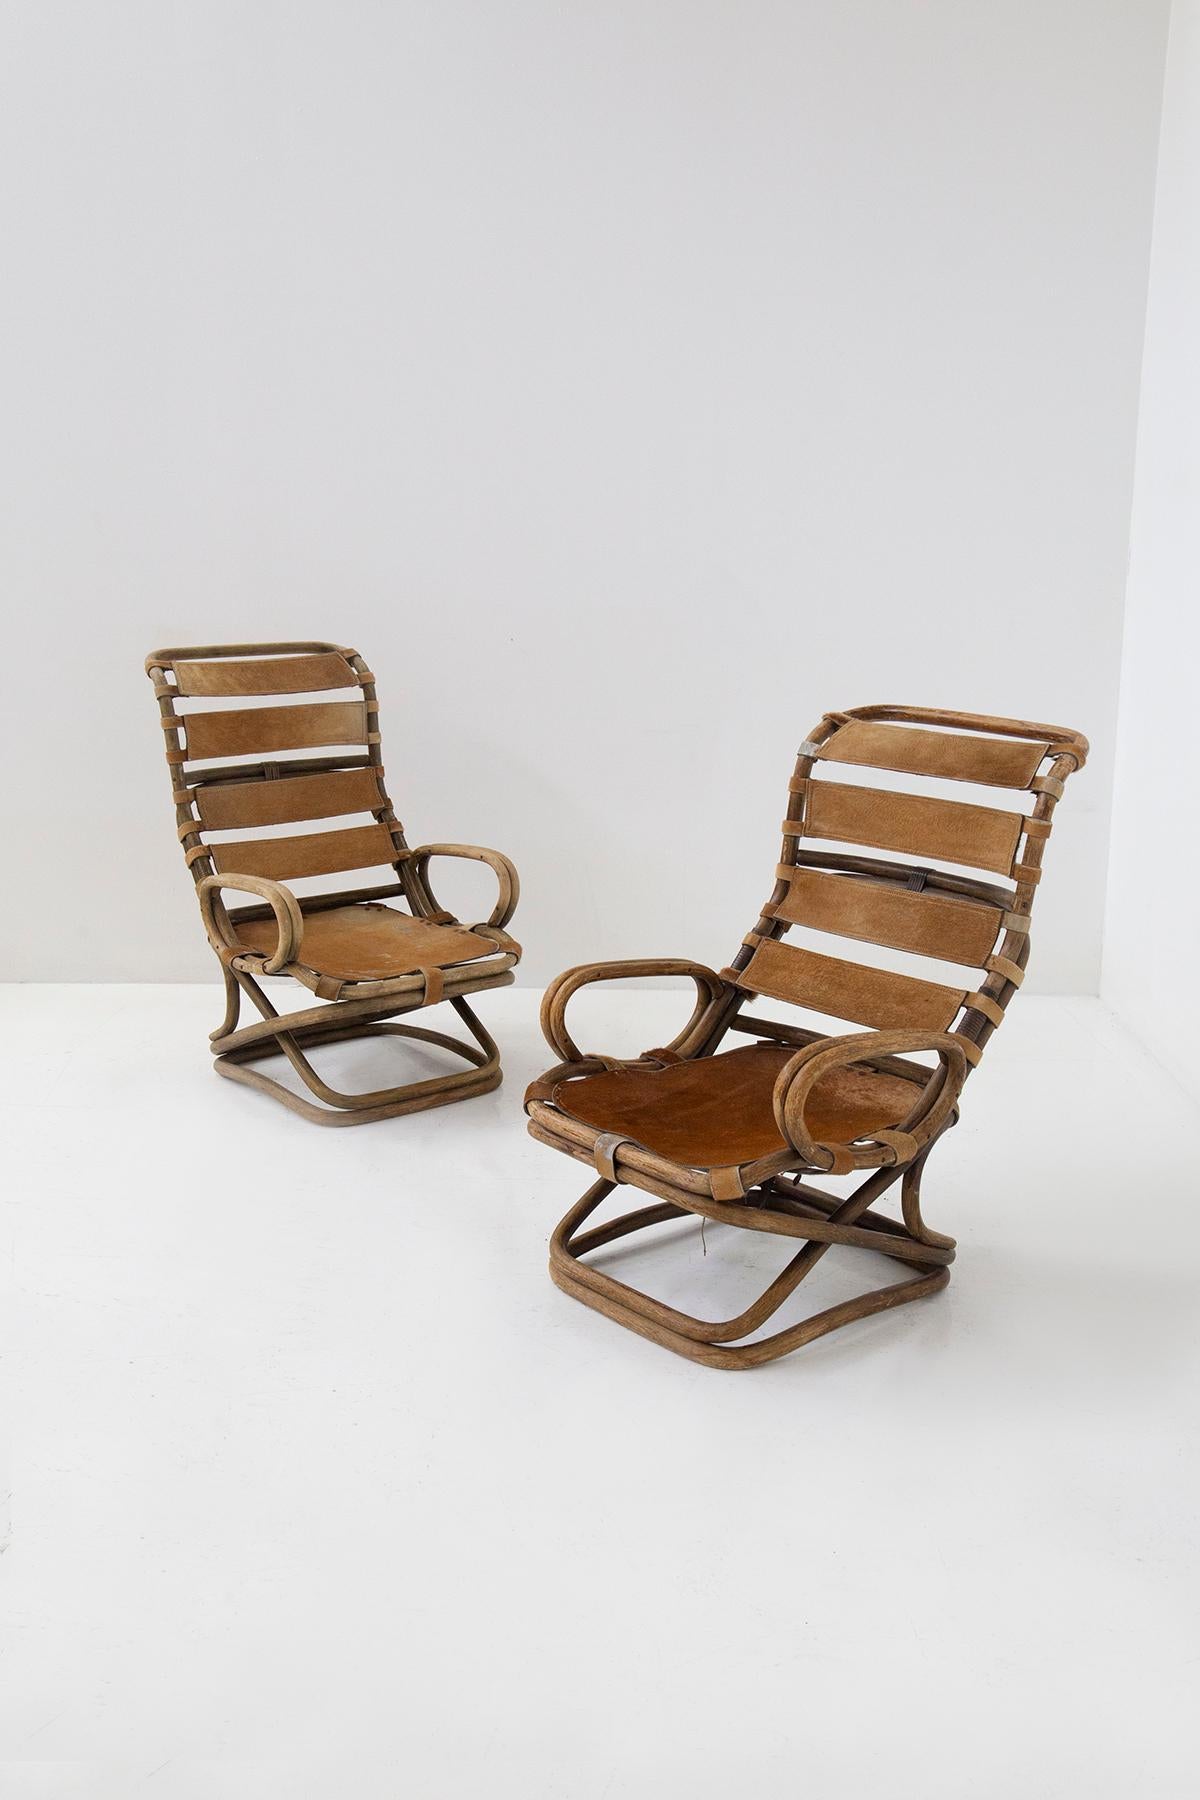 ransport yourself to the charm of 1950s Italy with a pair of exquisite bamboo armchairs attributed to the legendary Tito Agnoli. These chairs are not mere pieces of furniture; they are time capsules that hold the essence of an era characterized by